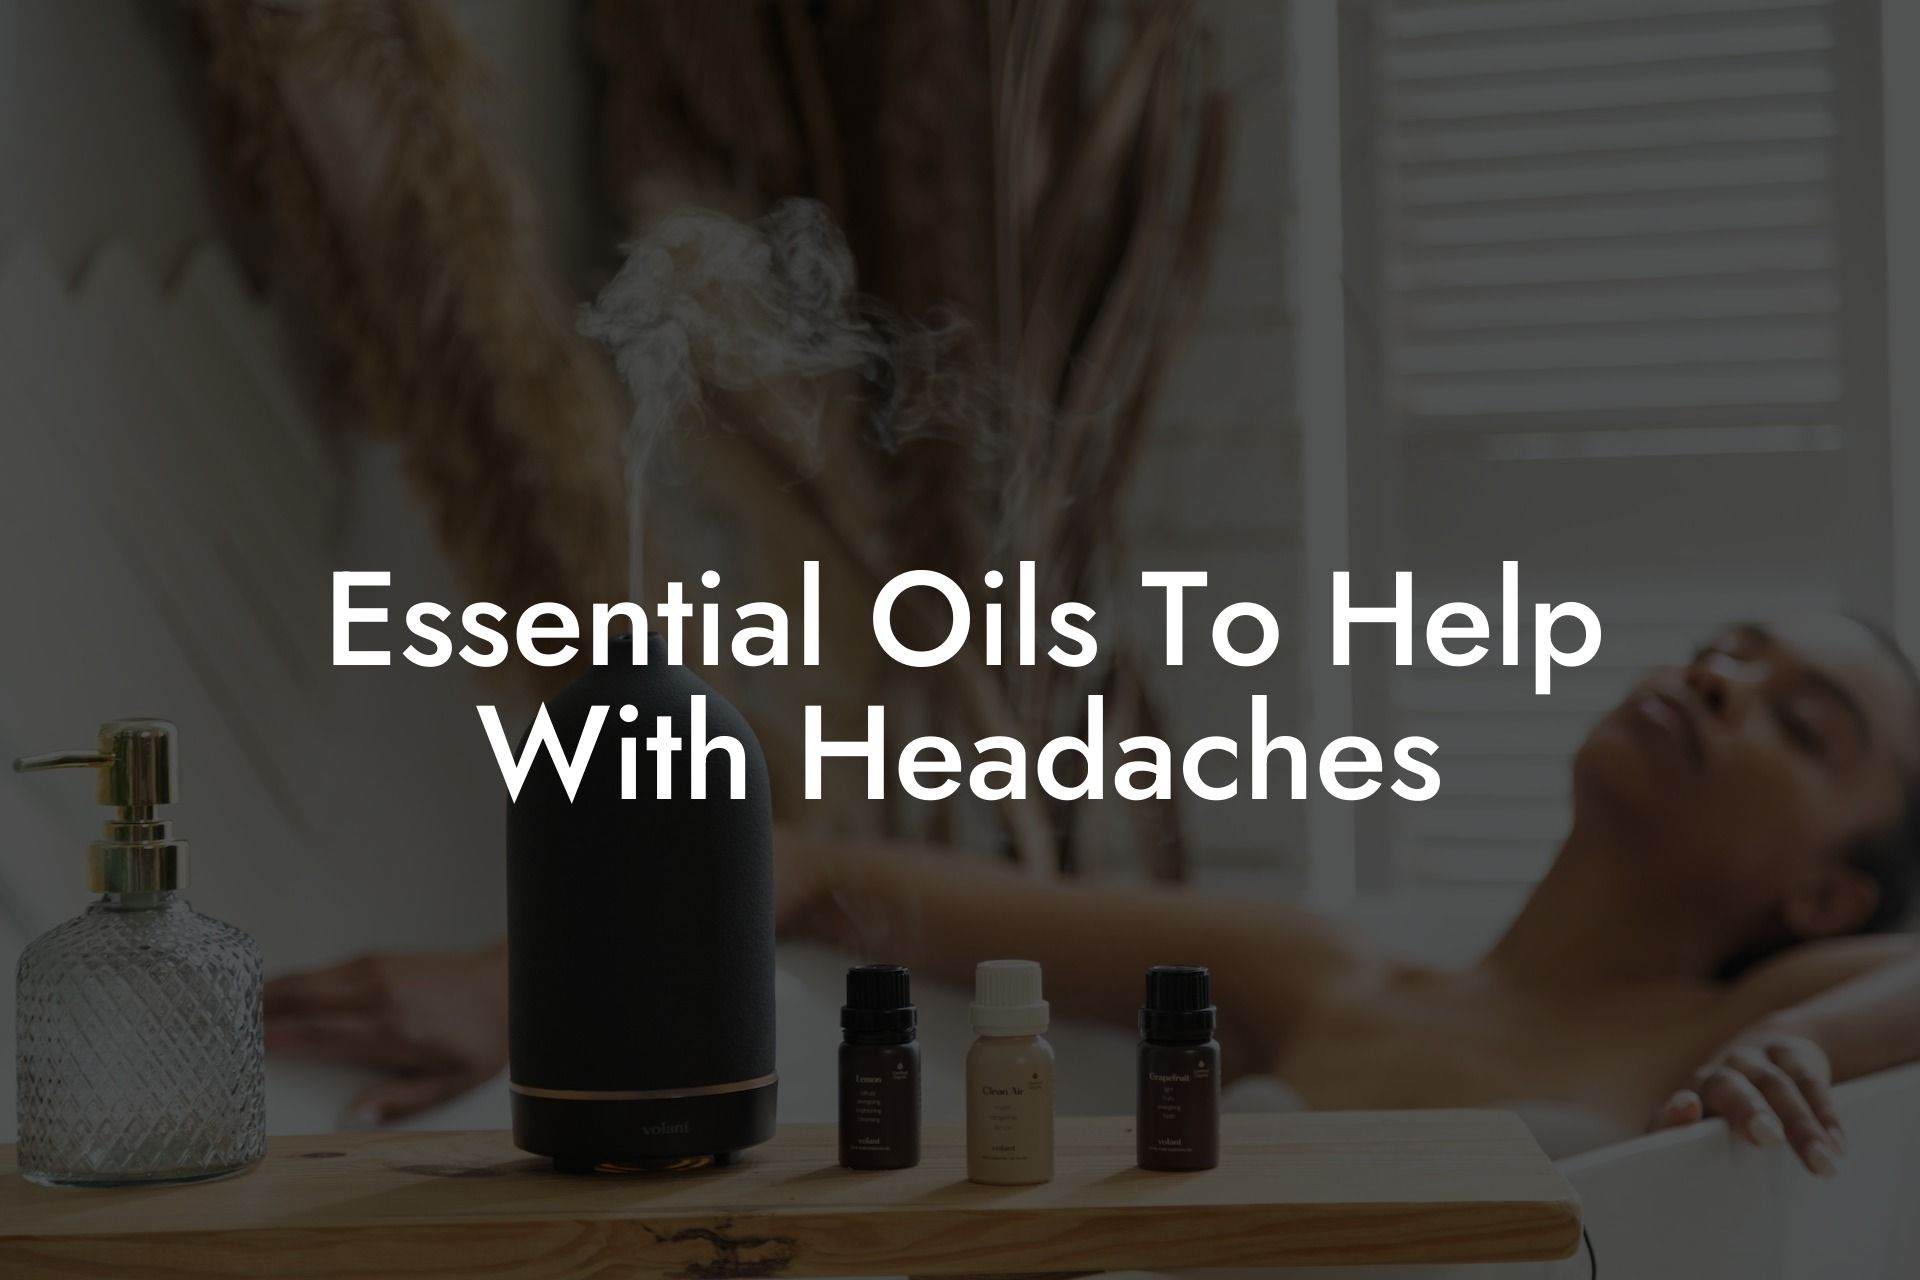 Essential Oils To Help With Headaches